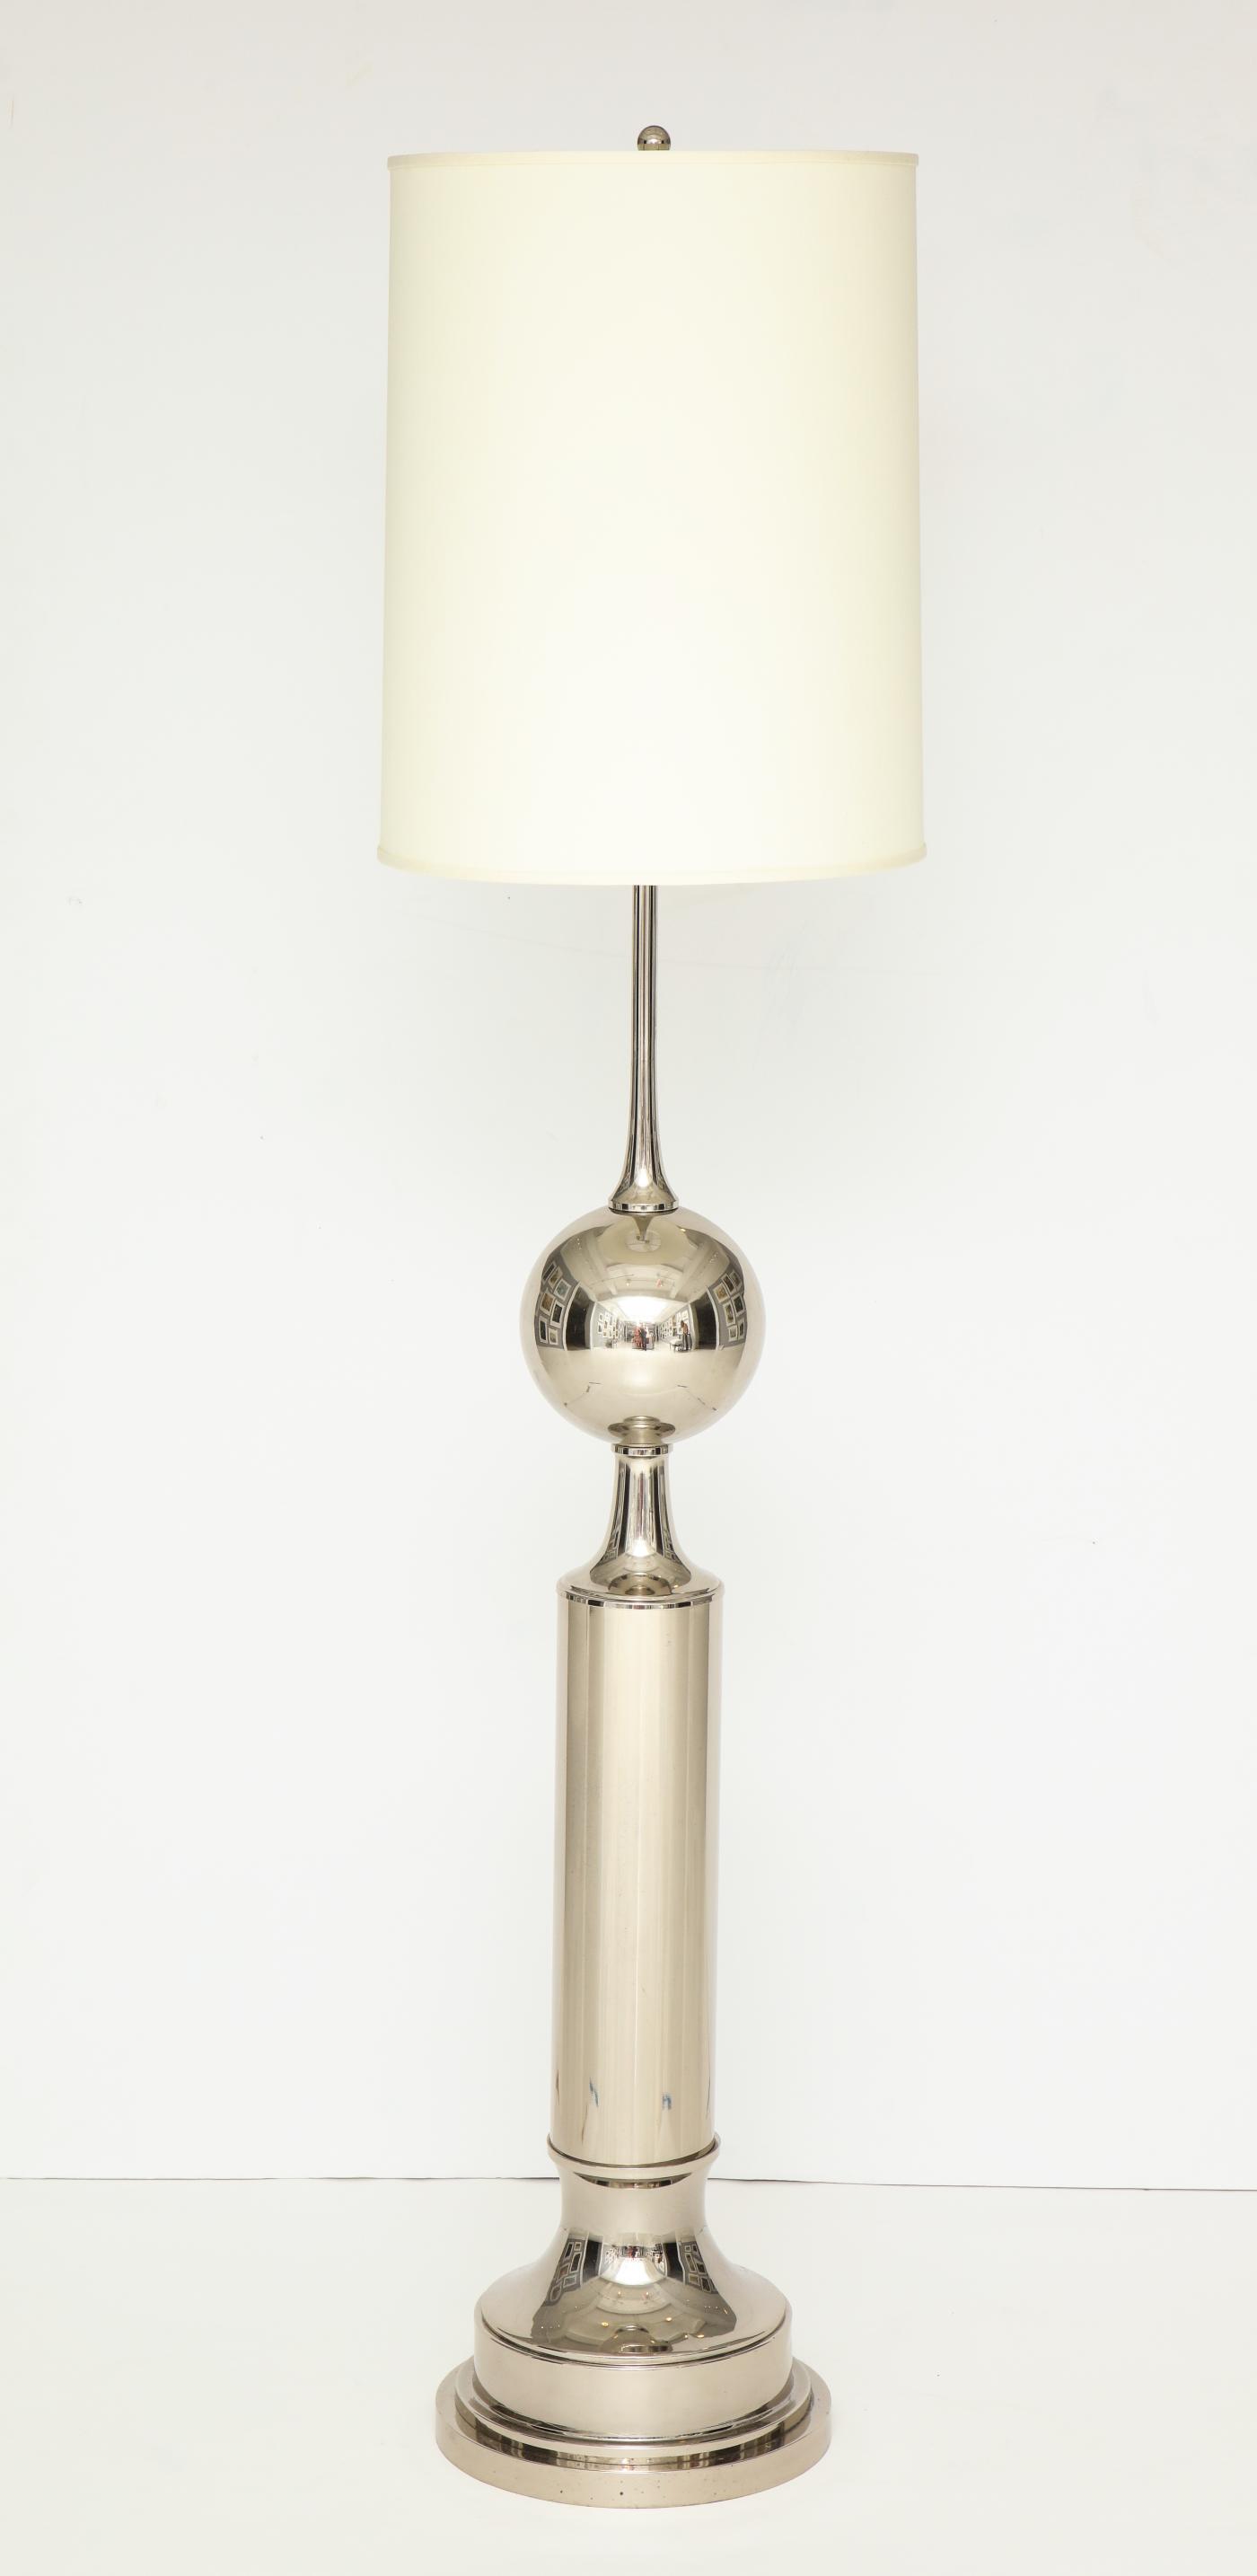 A French 40’s Floor Lamp. Crafted on nickel metal.